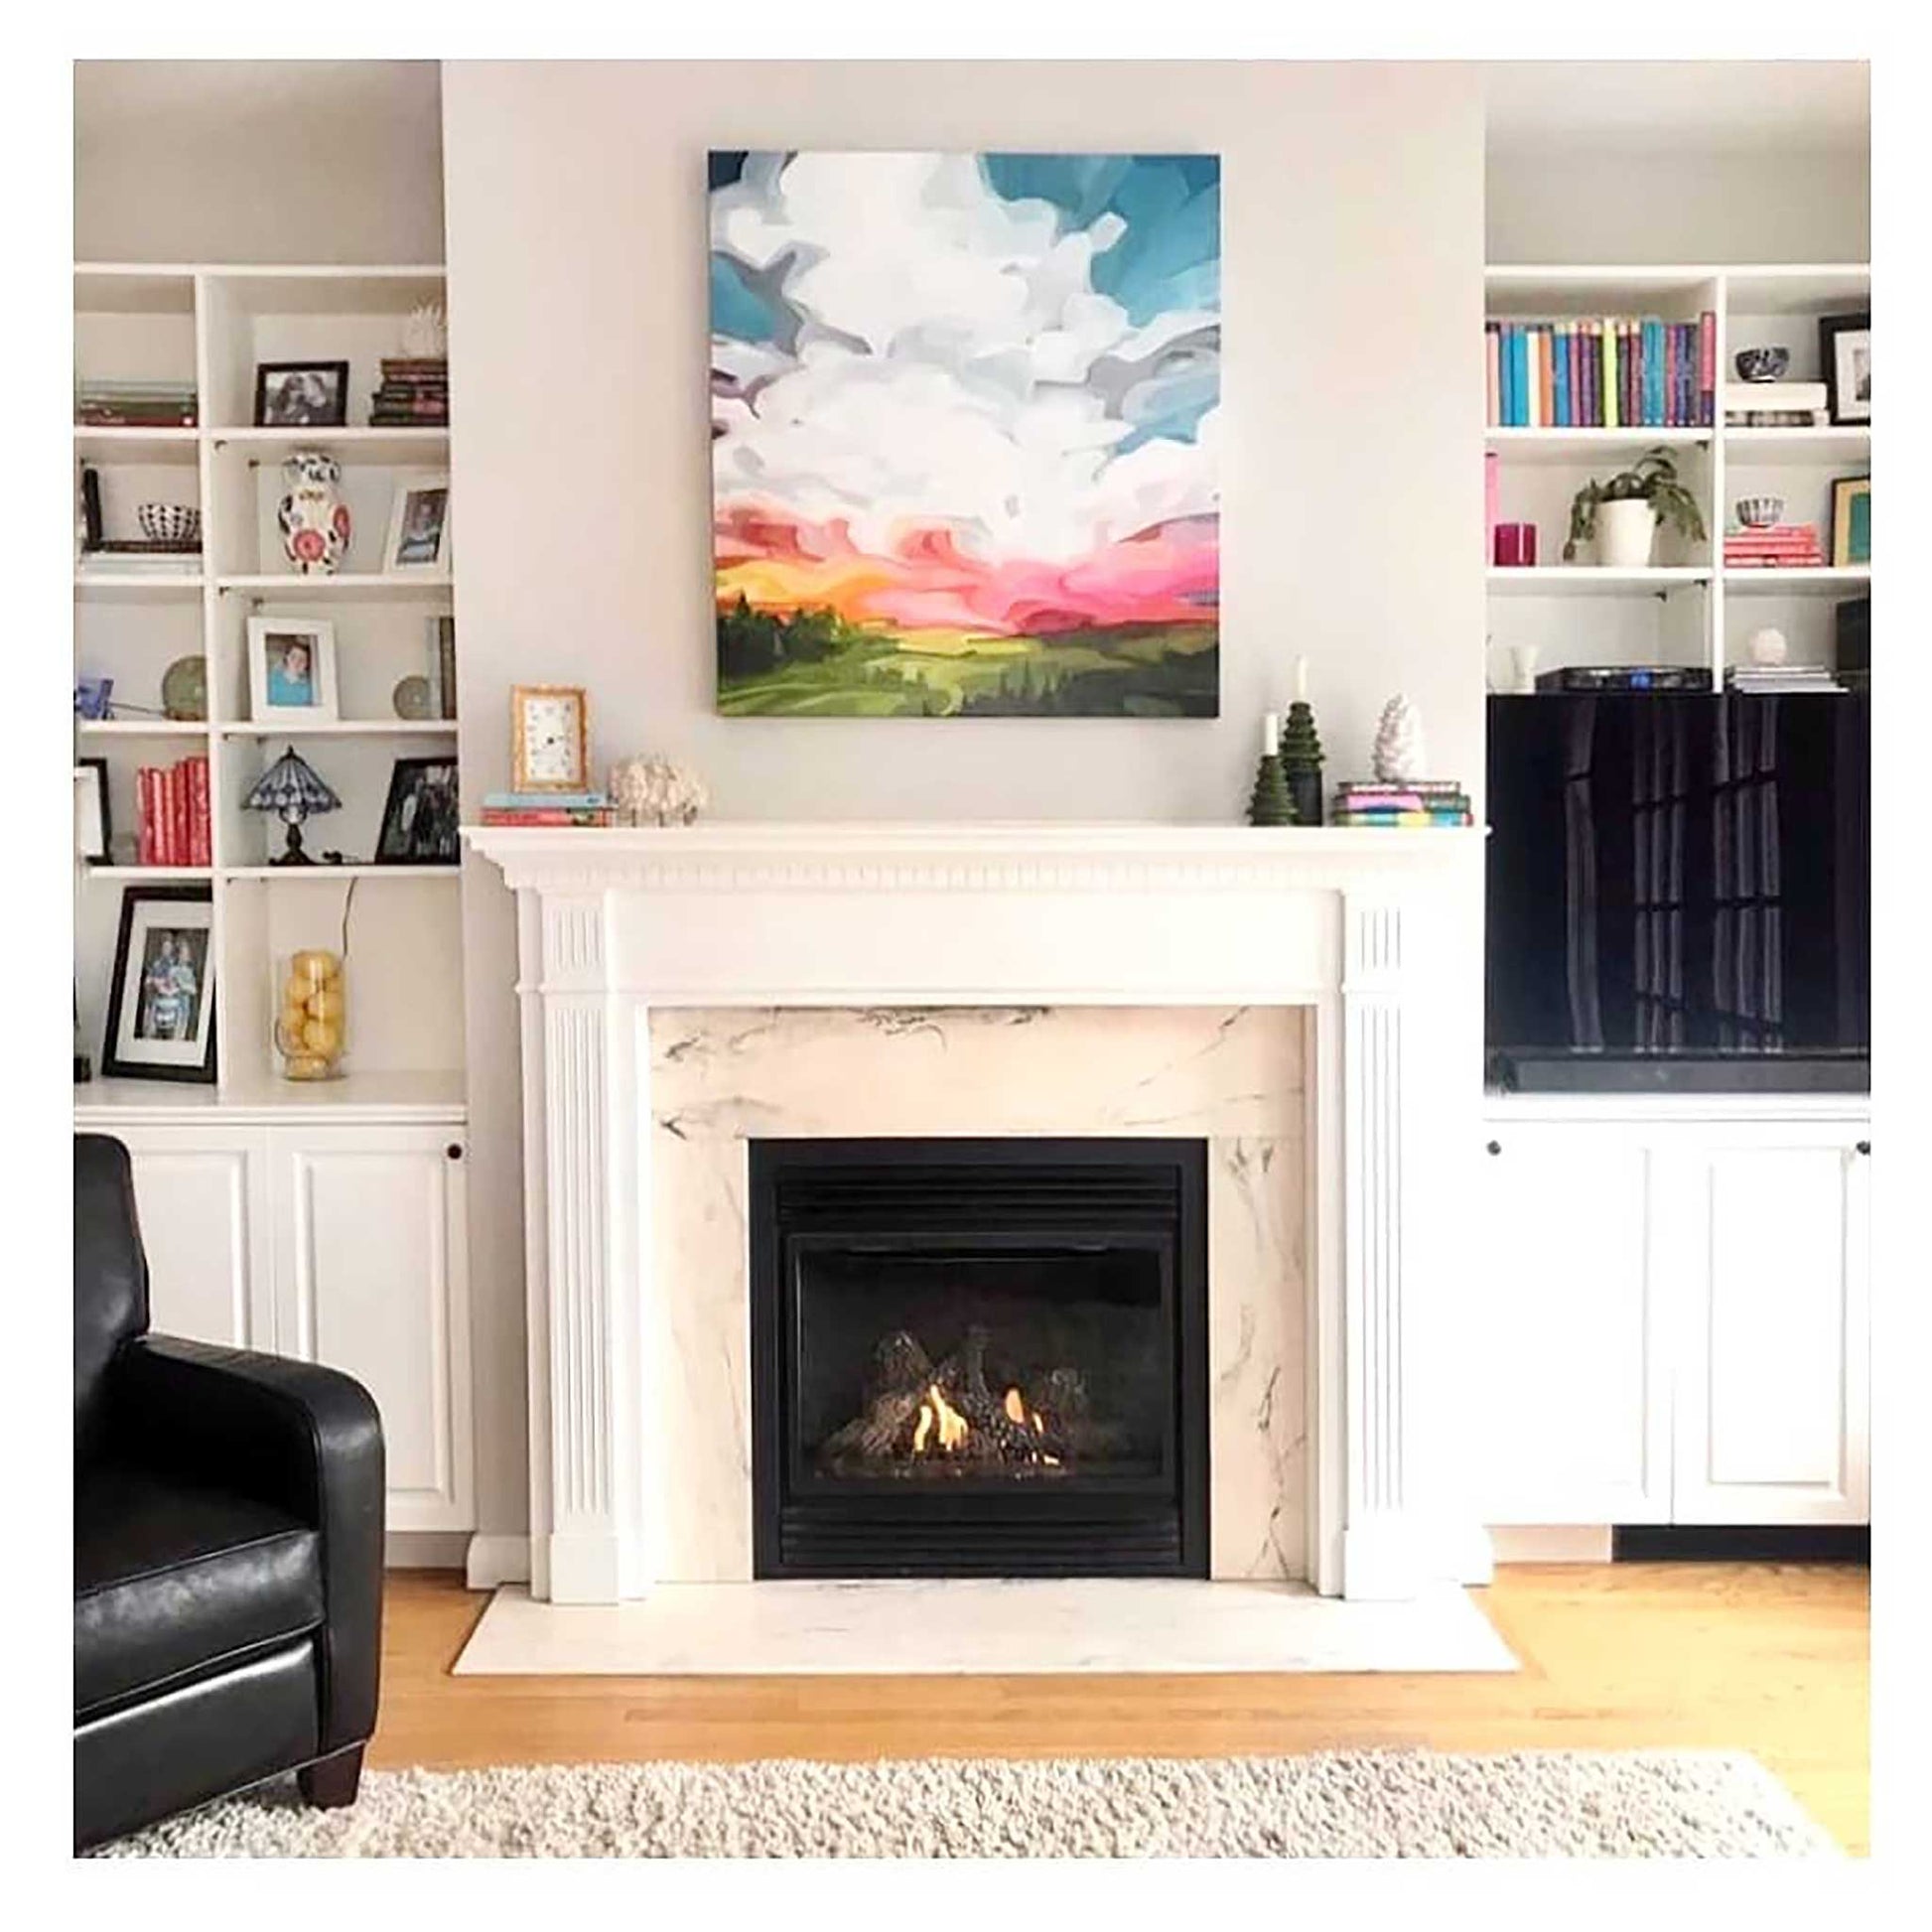 acrylic sky painting original artwork hung in living room over fireplace